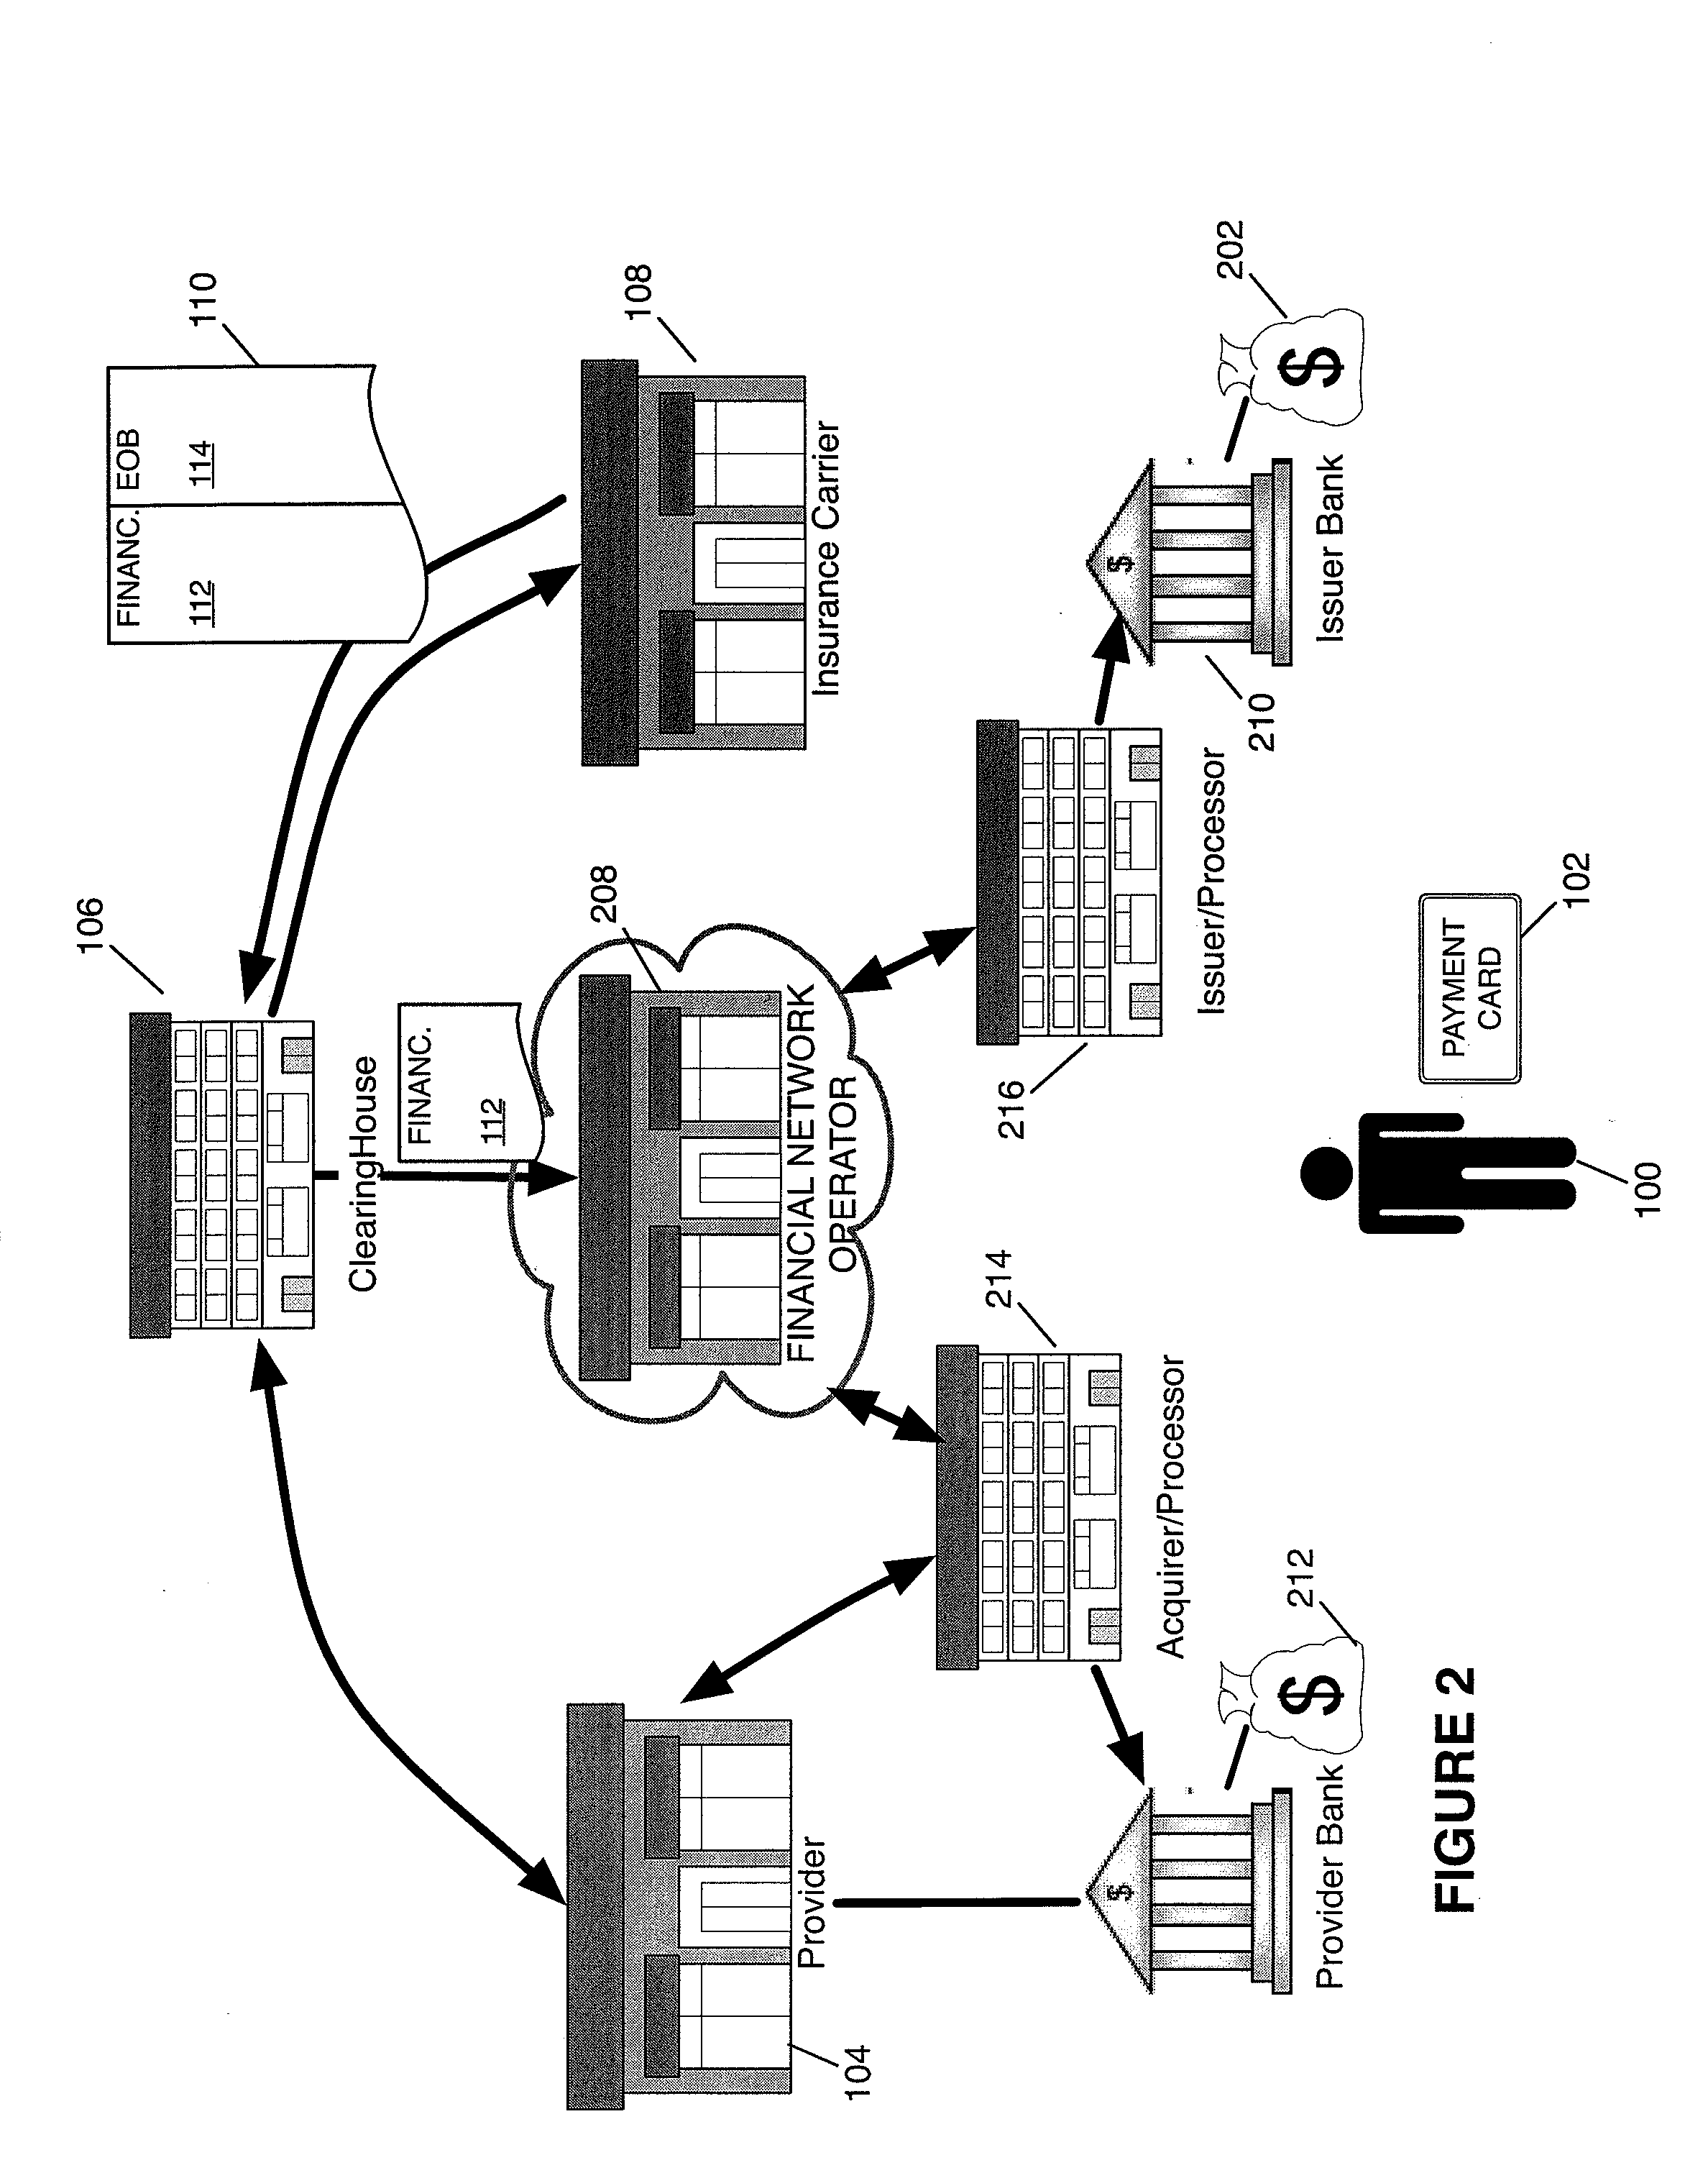 System and method for adjudication and settlement of health care claims